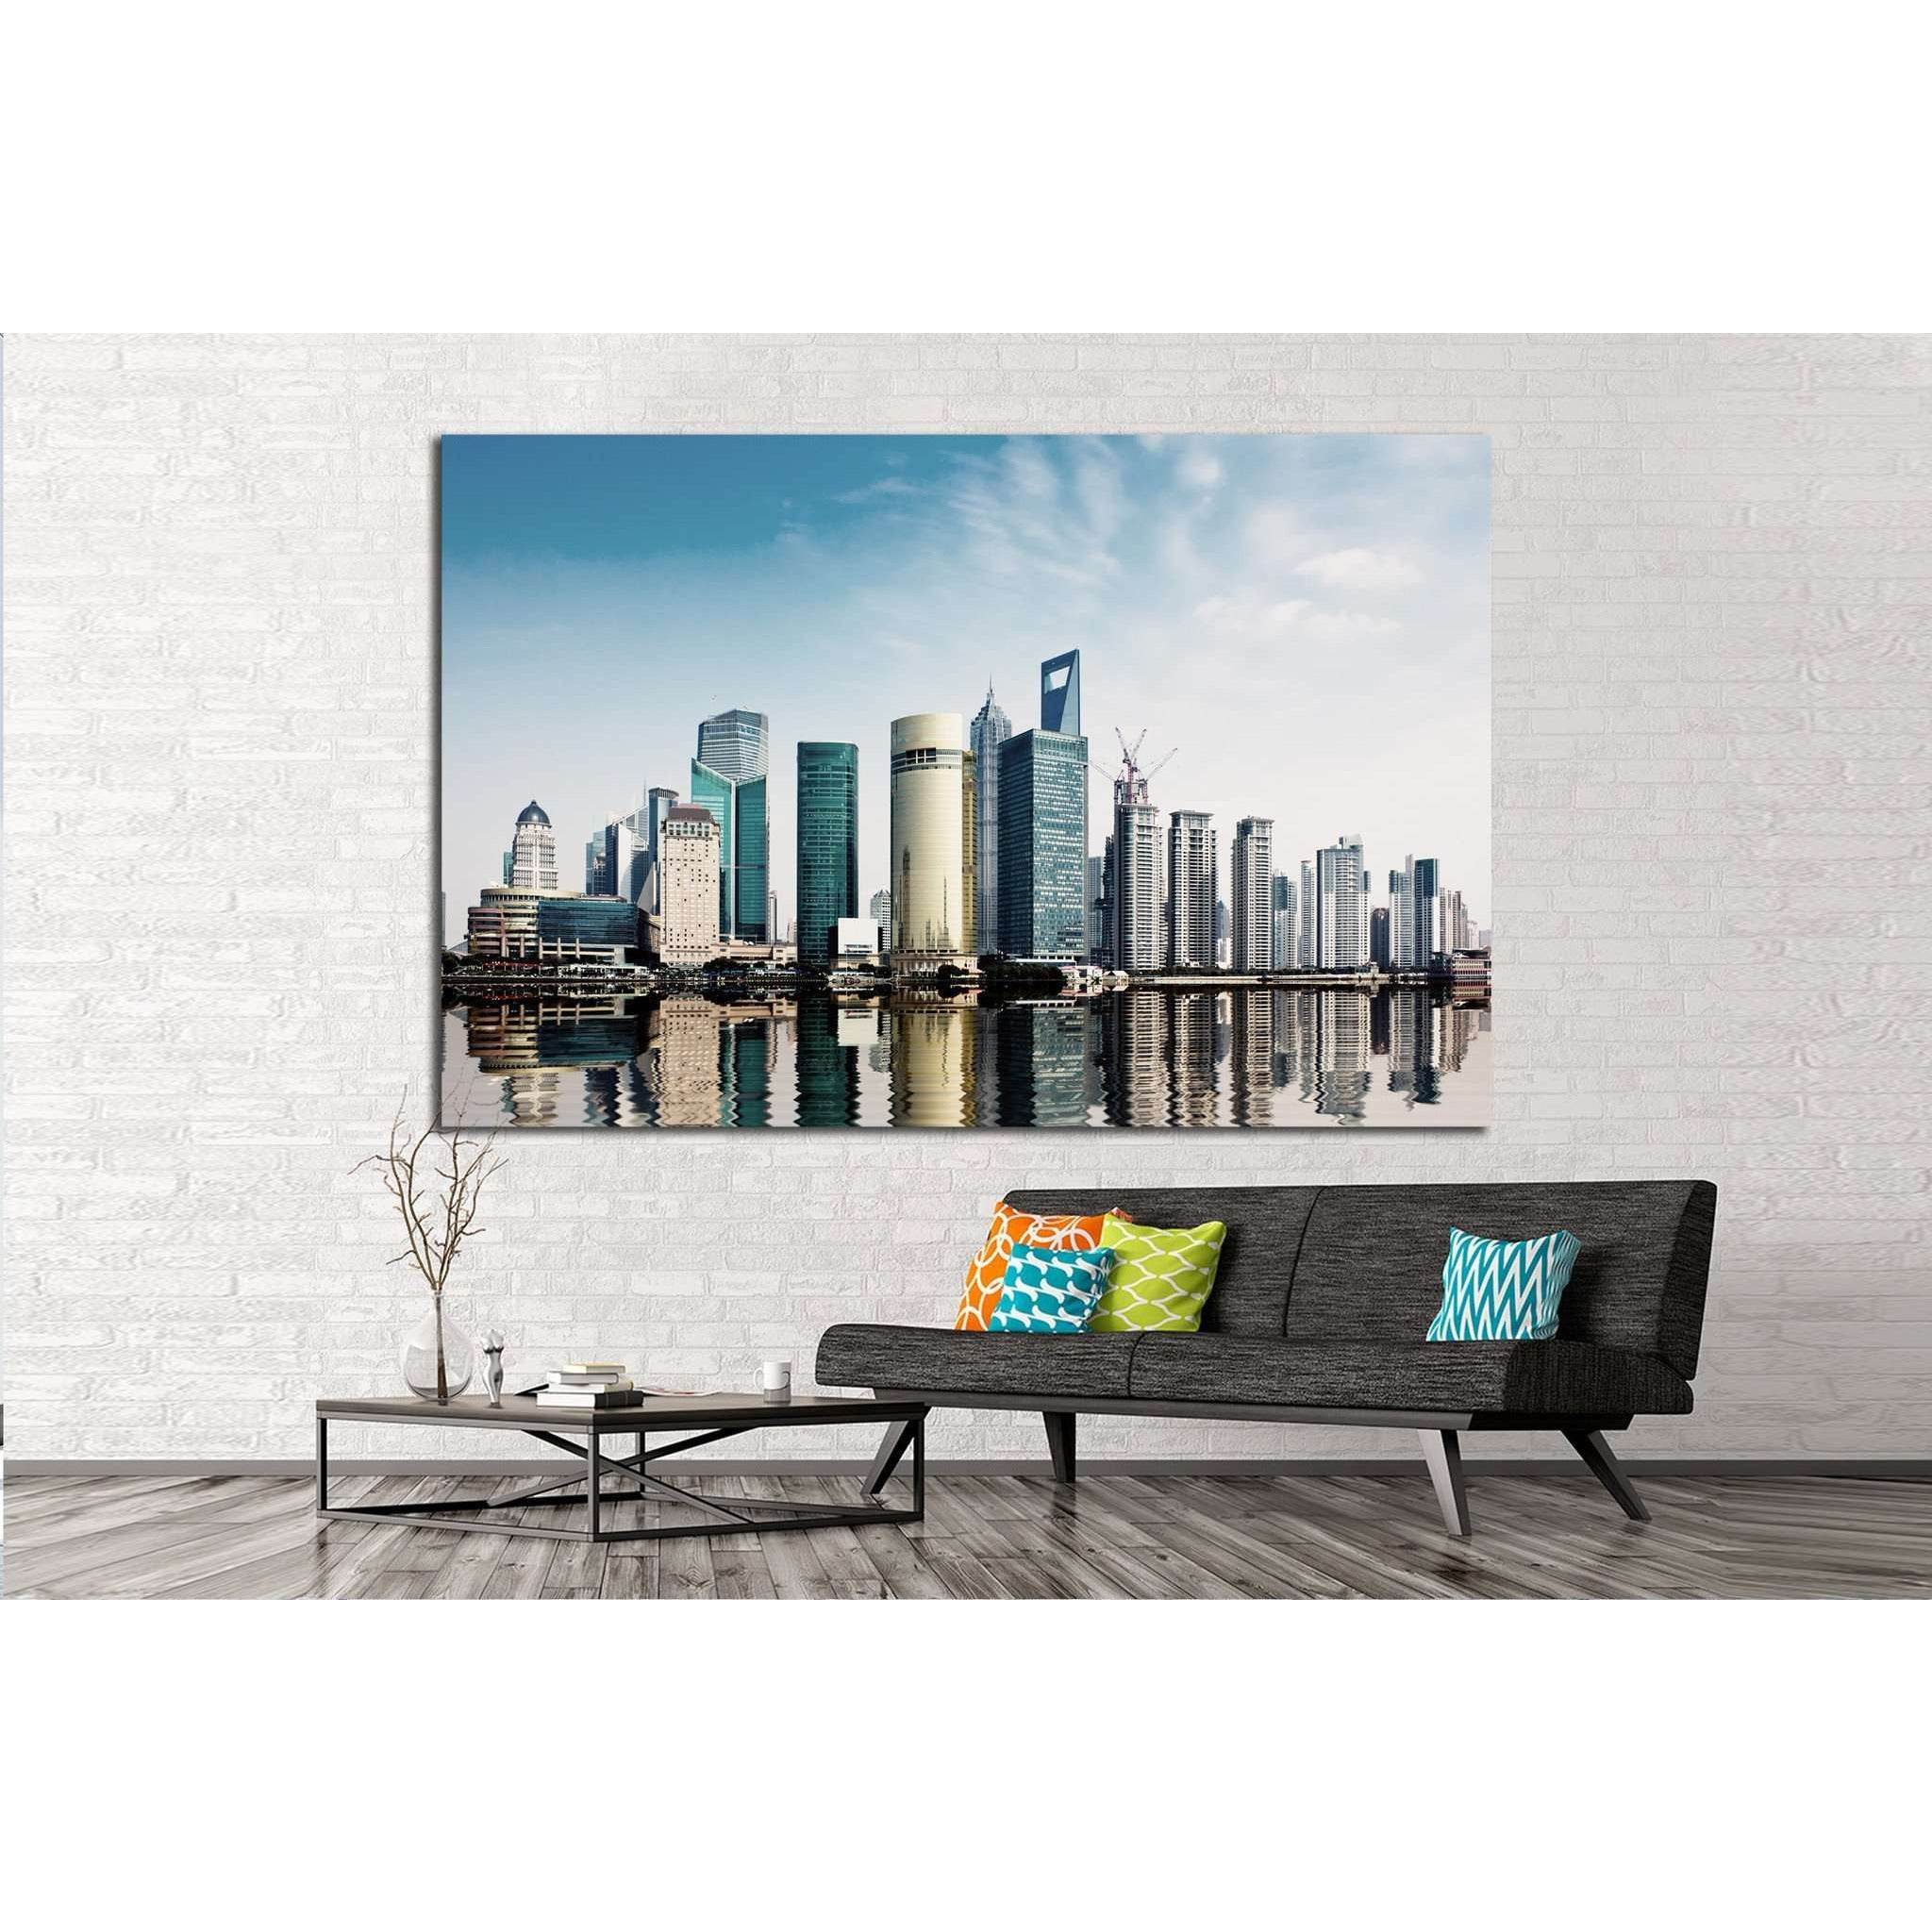 shanghai skyline in daytime №1155 Ready to Hang Canvas Print